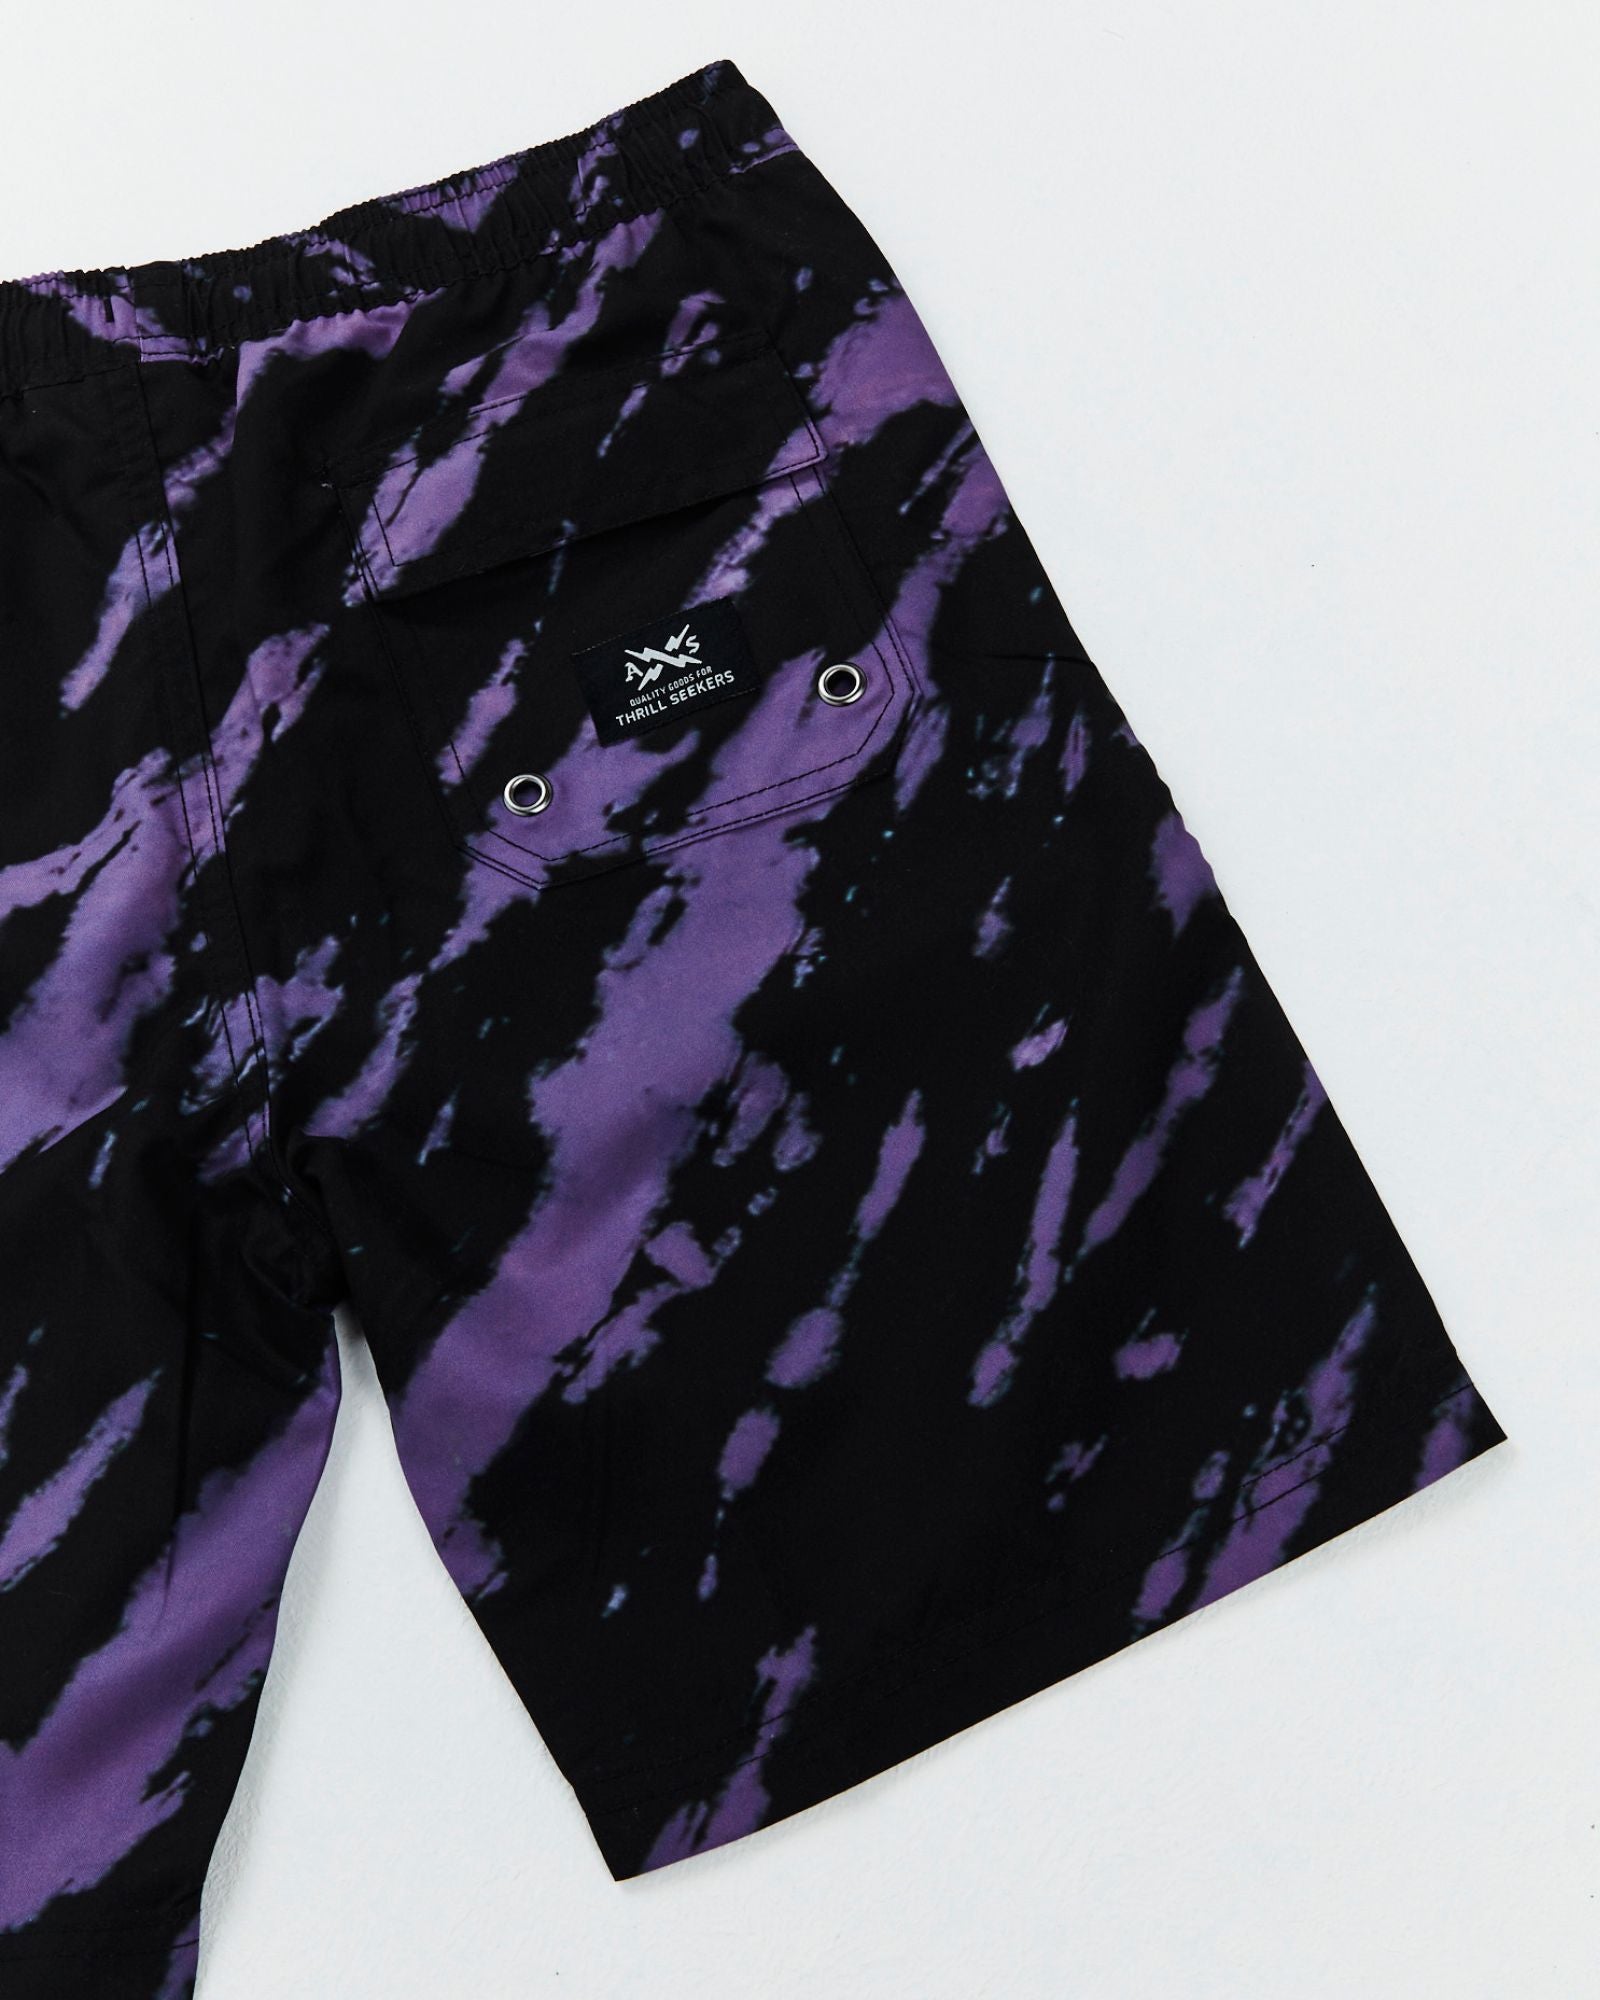 Teen Riptide Boardshorts by Alphabet Soup for boys aged 8-16. Feature an elastic waist, faux fly, diagonal tie purple and black dye, and bold logo patches.